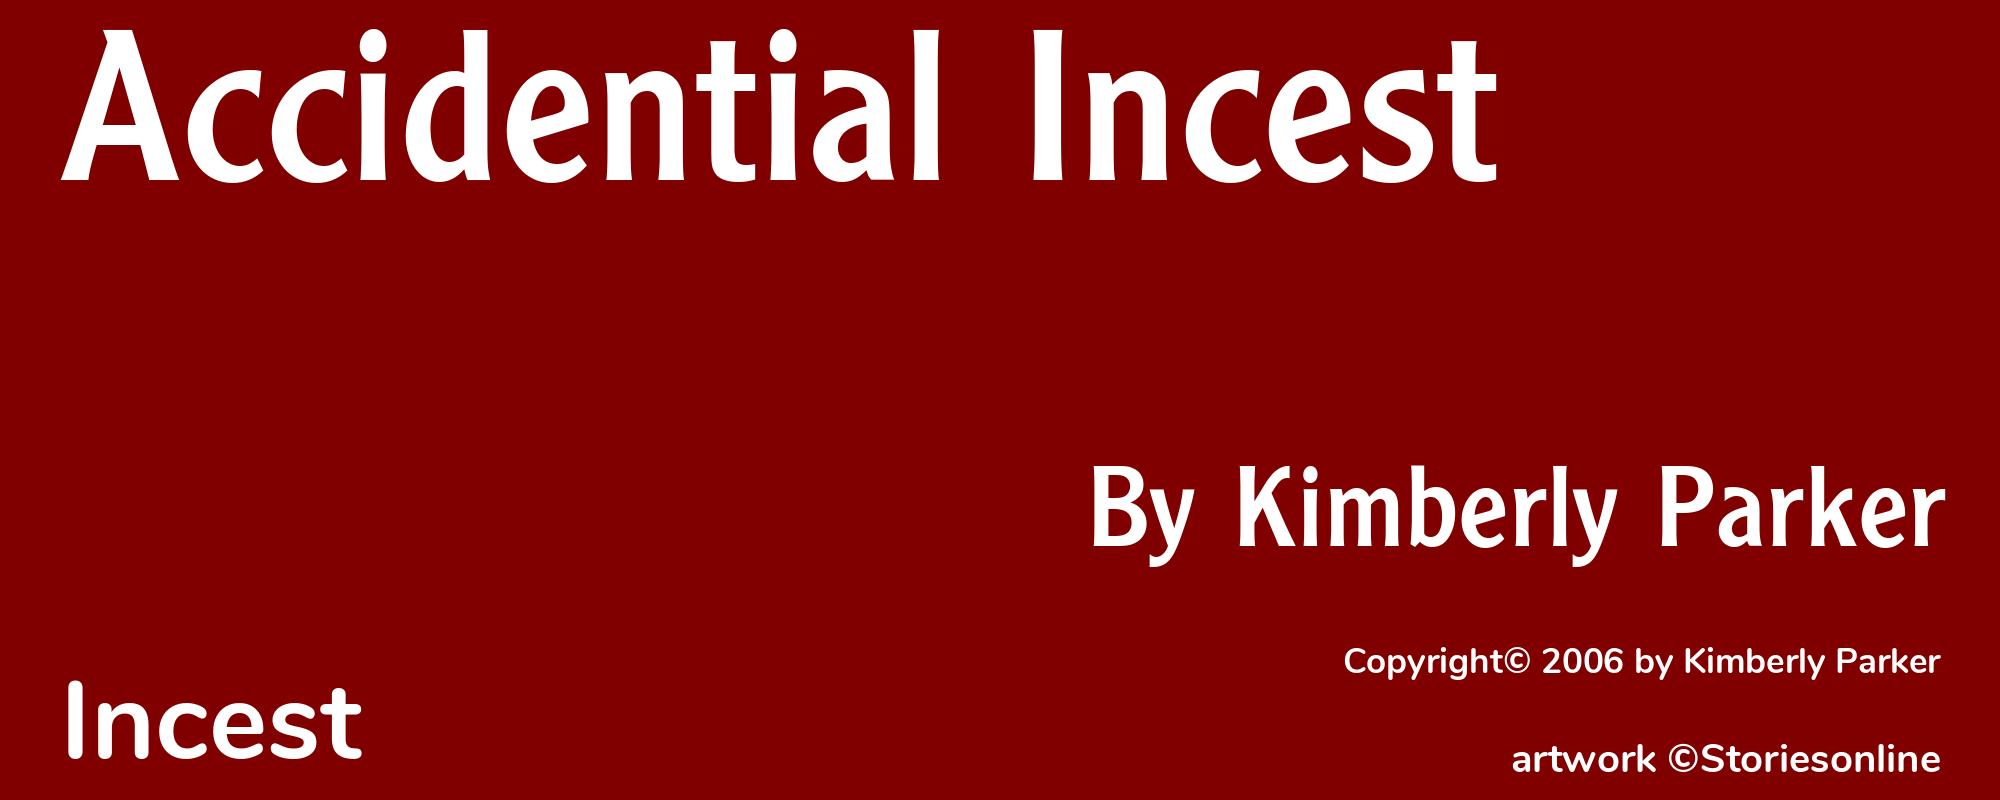 Accidential Incest - Cover